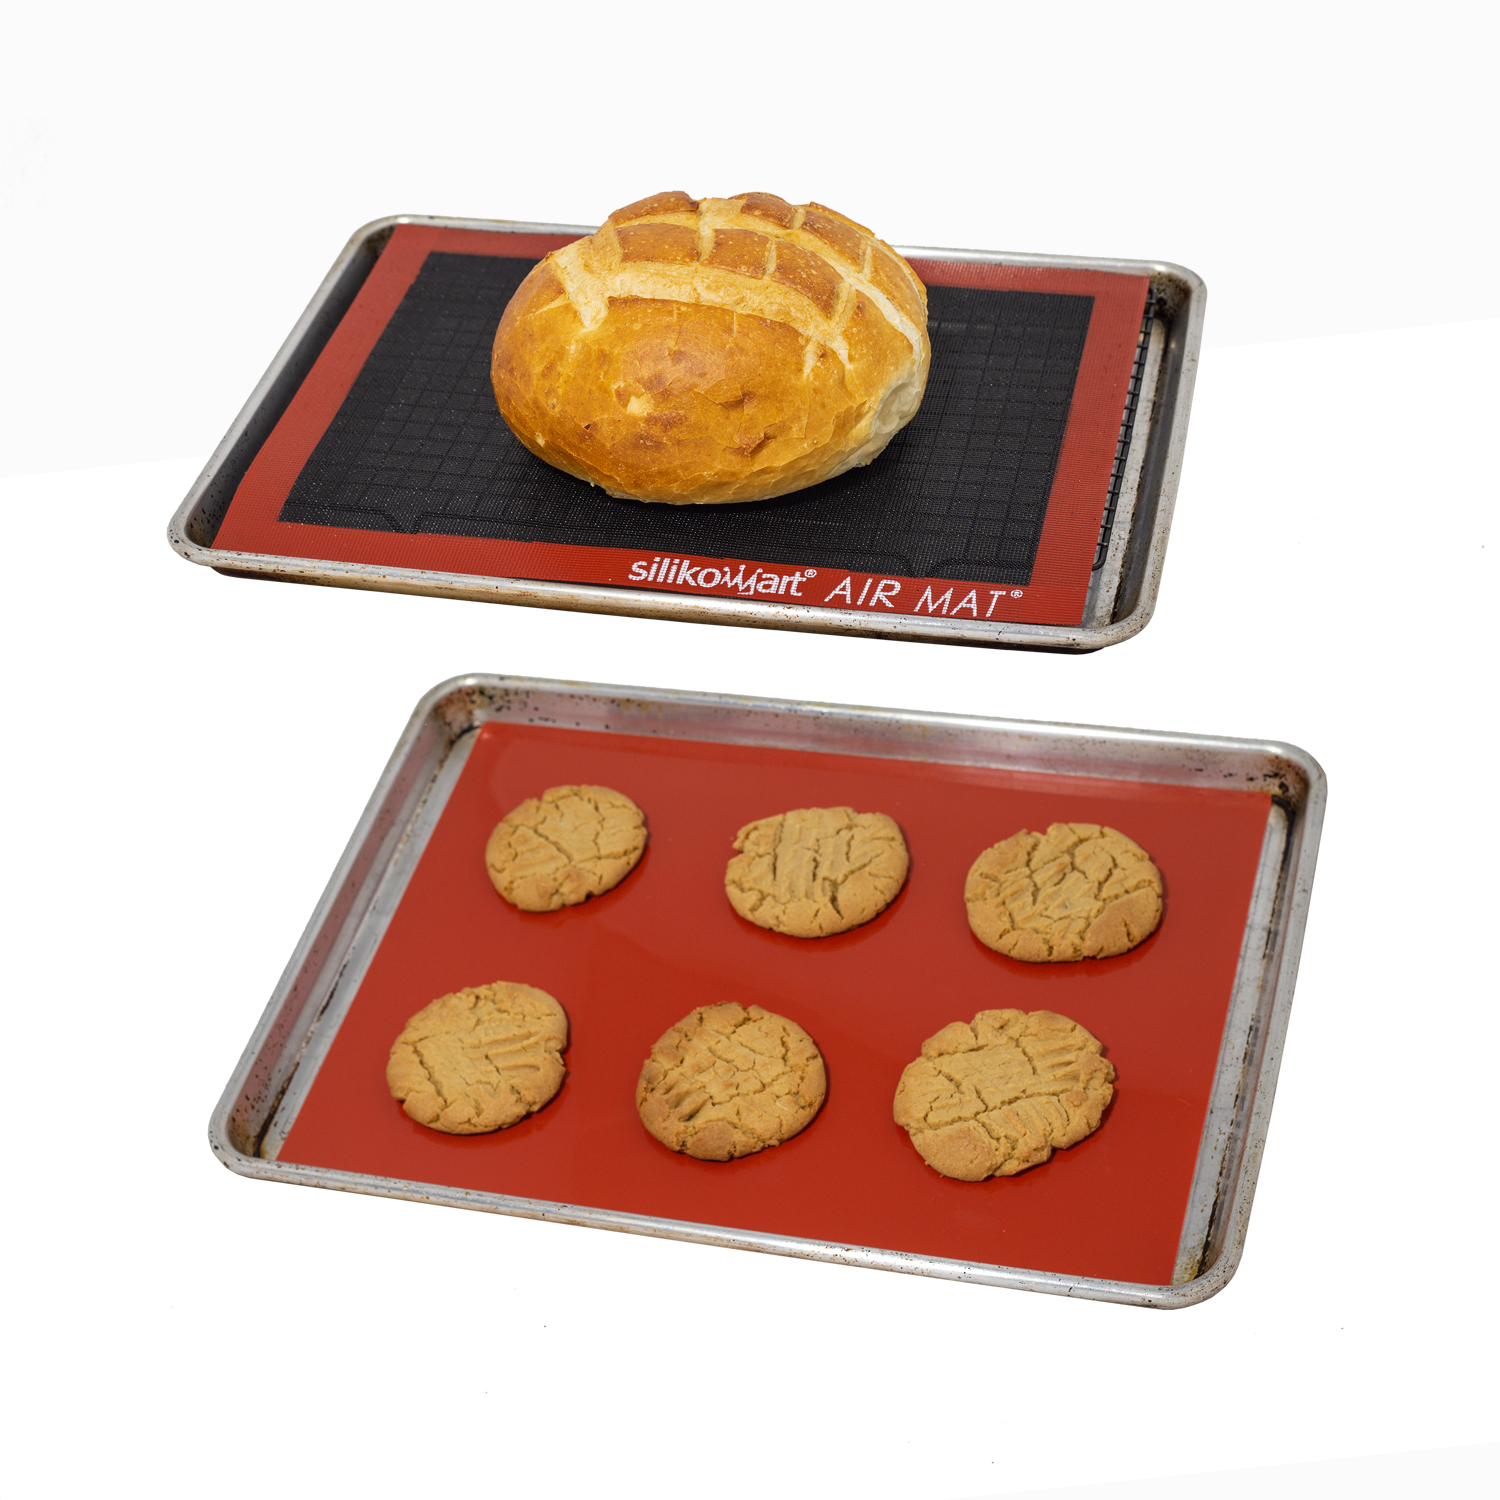 SILICONE NON-stick OVEN BAKING Roasting MAT TRAY SHEET LINER PASTRY PIZZA Cake 